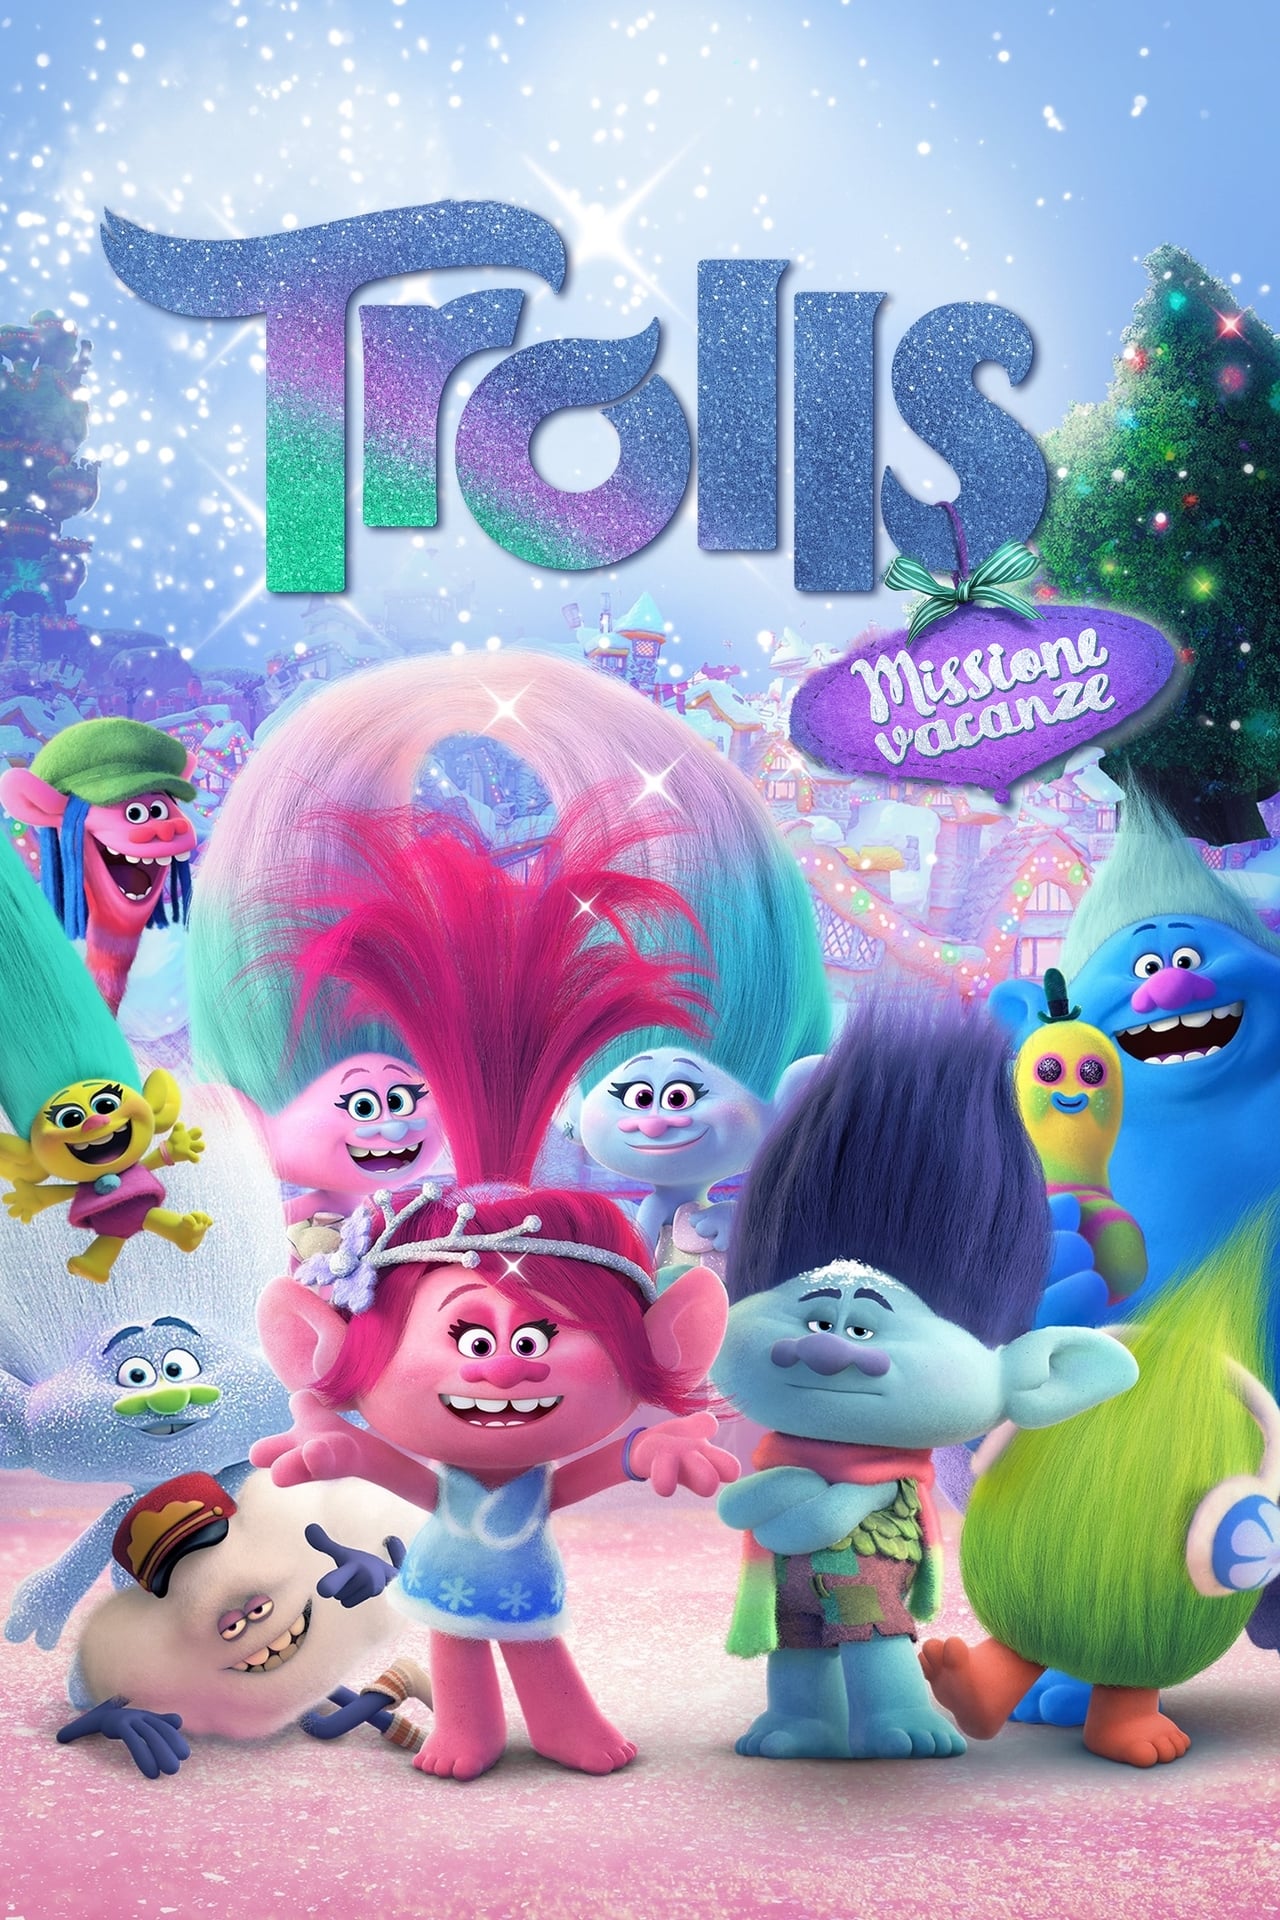 Trolls Holiday wiki, synopsis, reviews, watch and download